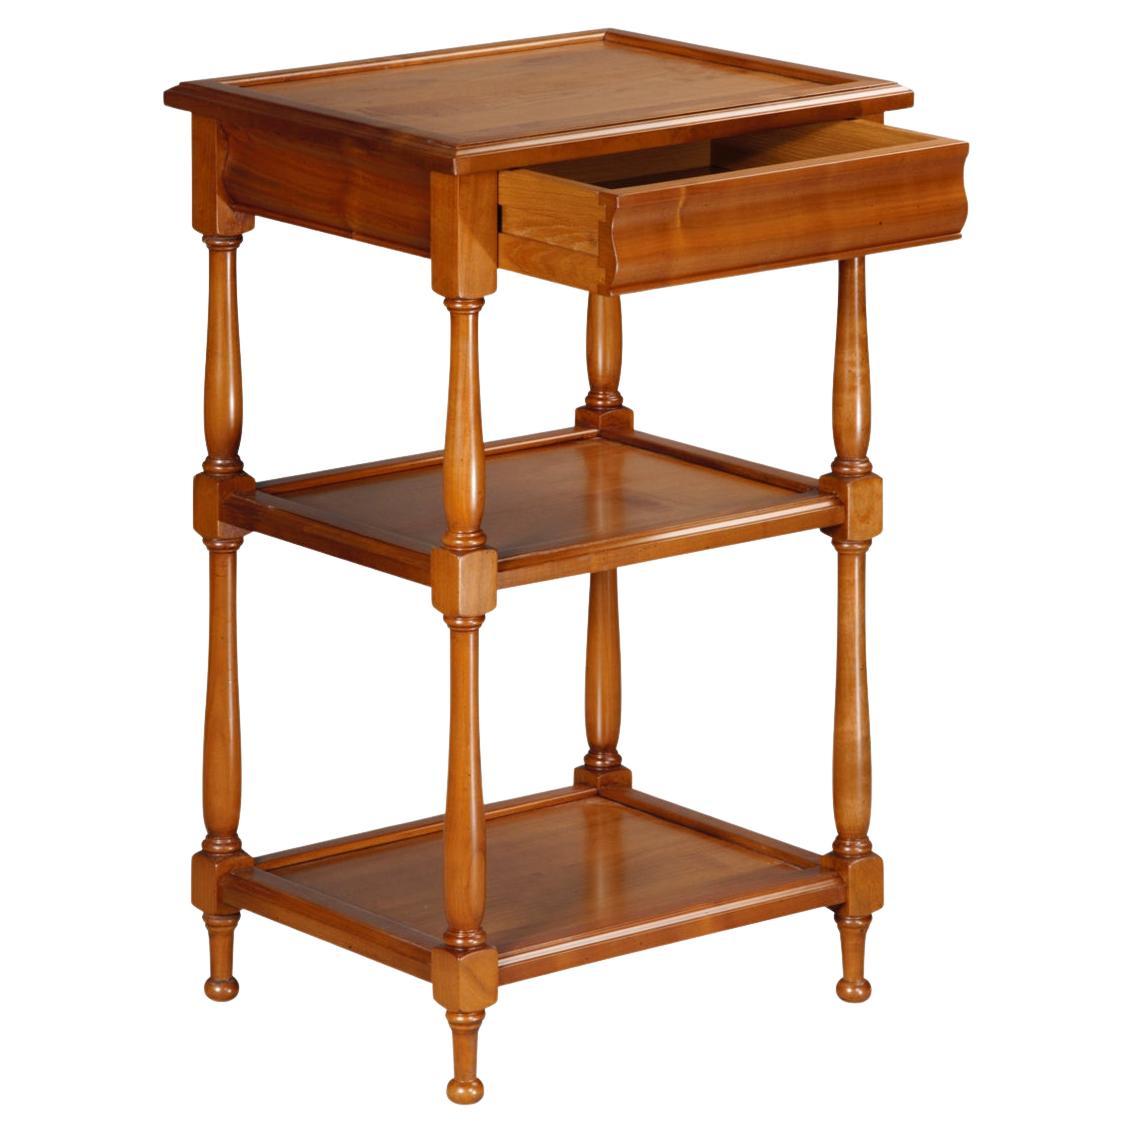 Louis Philippe Style Serving Table in Solid Cherry Wood, 1 Drawer and 2 Shelves